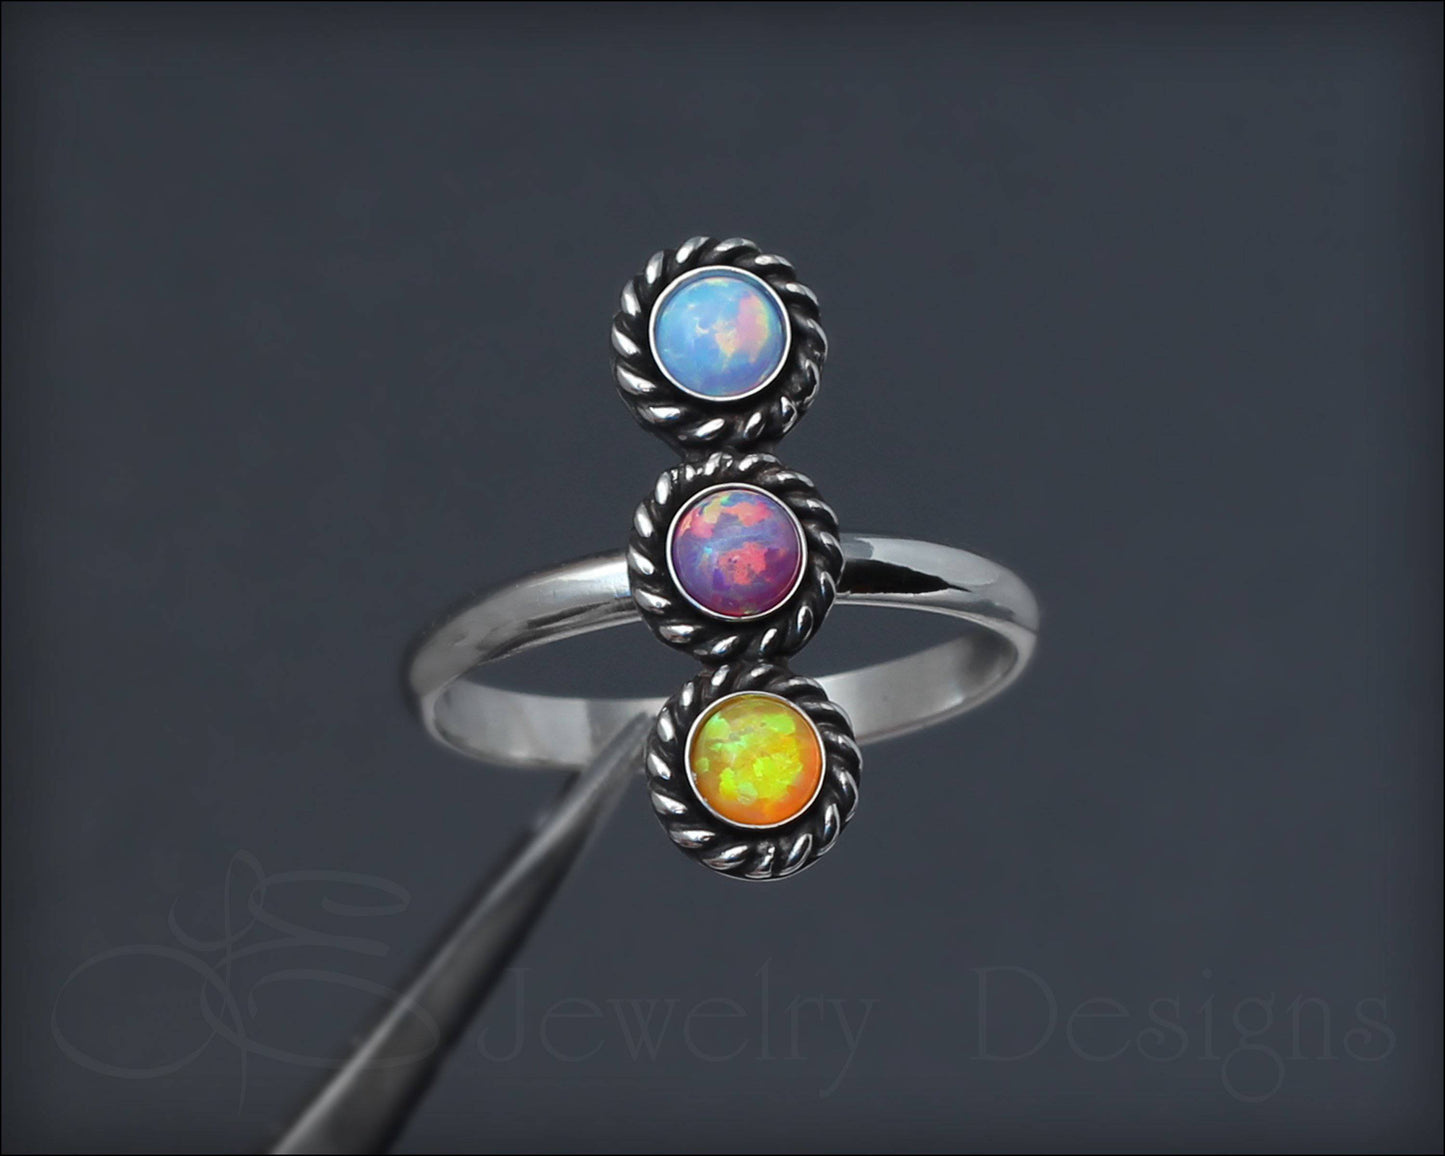 3-Stone Vertical Ring (w/opals or birthstones) - LE Jewelry Designs